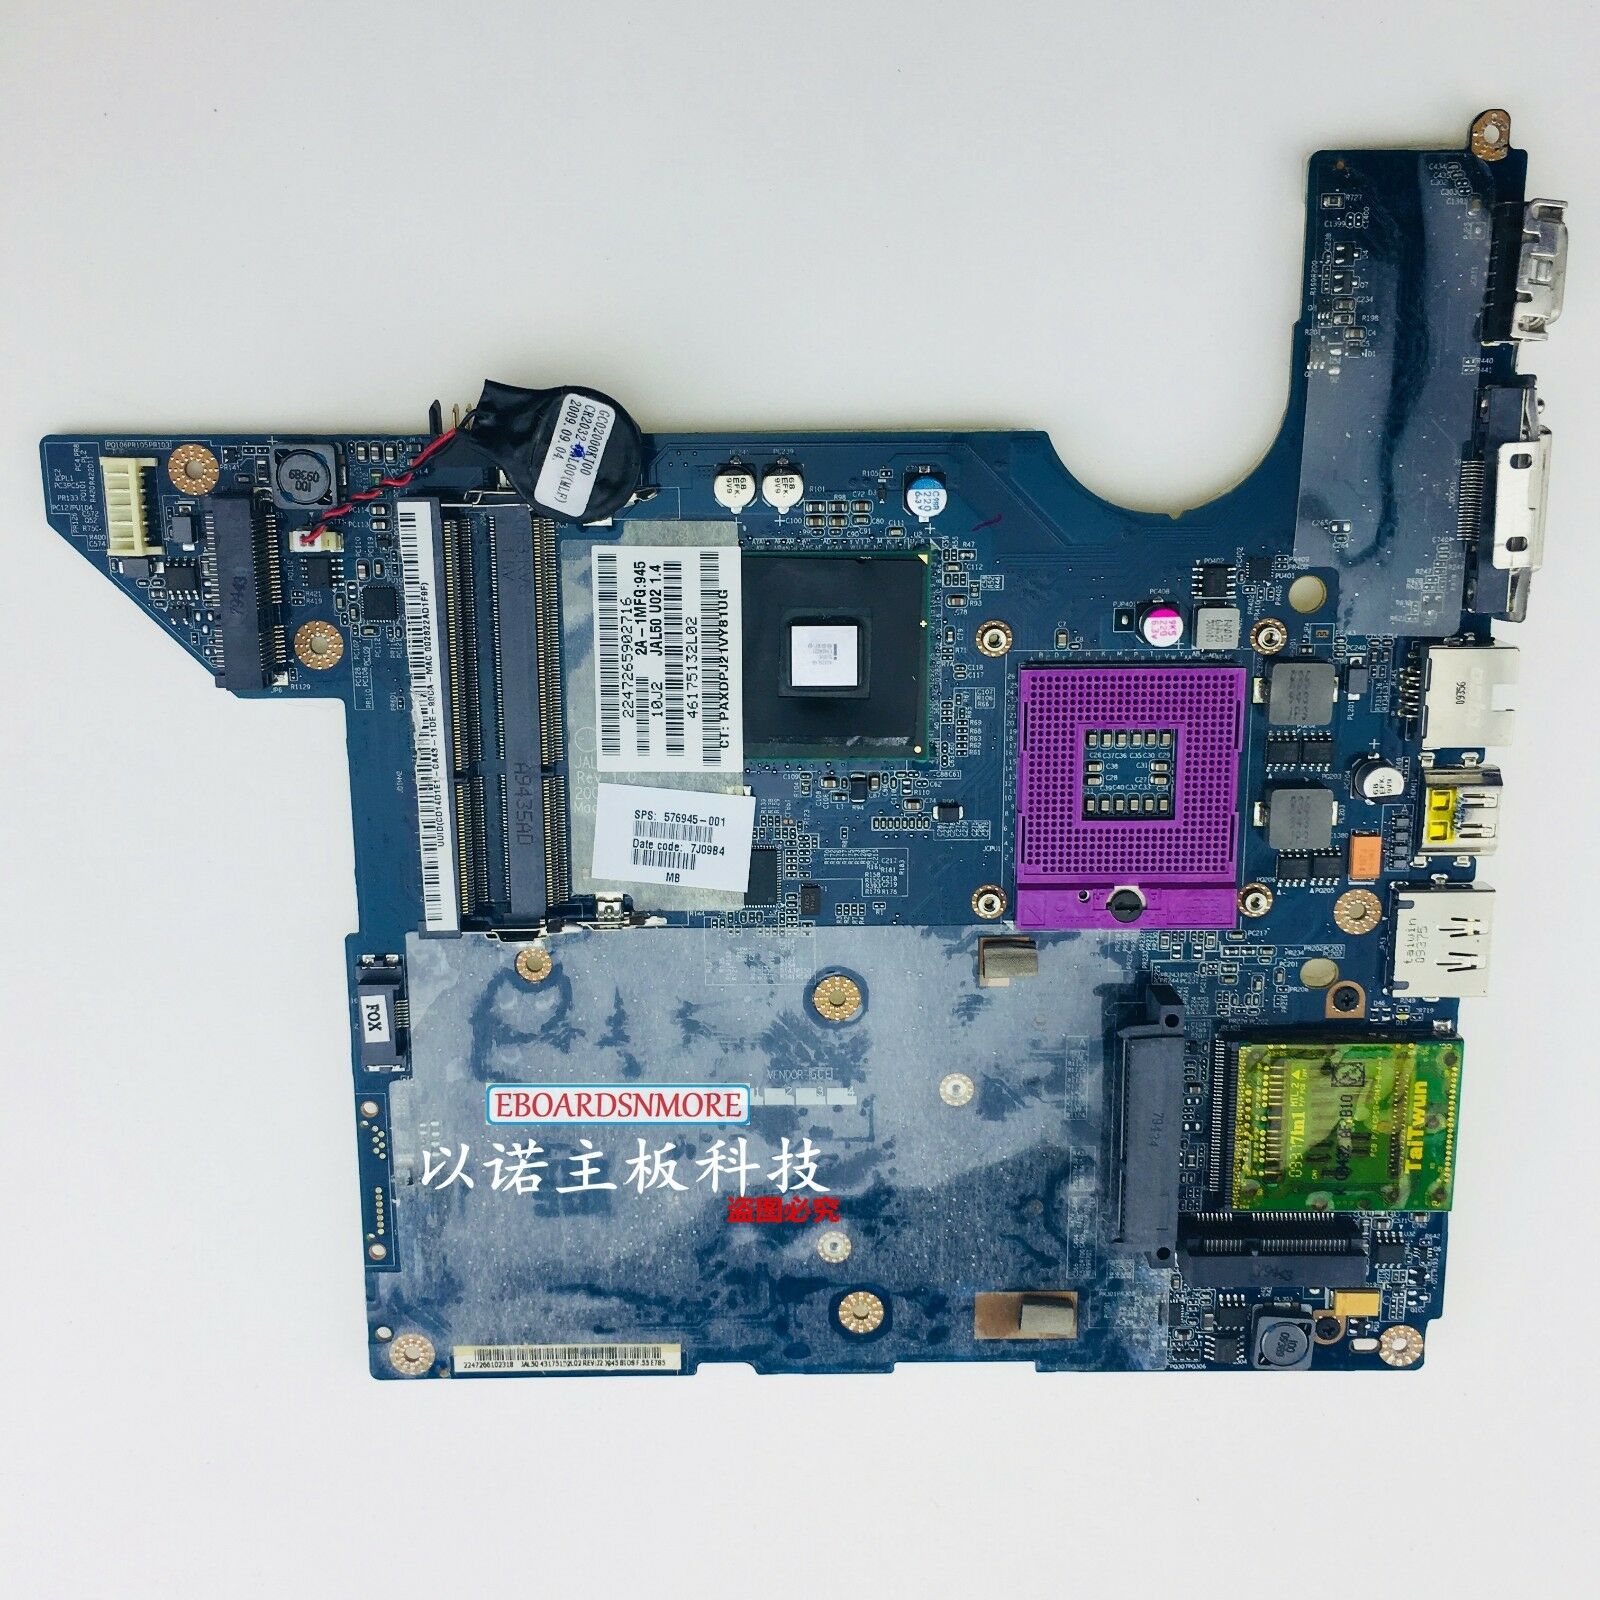 576945-001 GM45 Motherboard for HP Pavilion DV4-1500 -1600 Series laptop,DDR3, A Brand: HP Memory Type: S